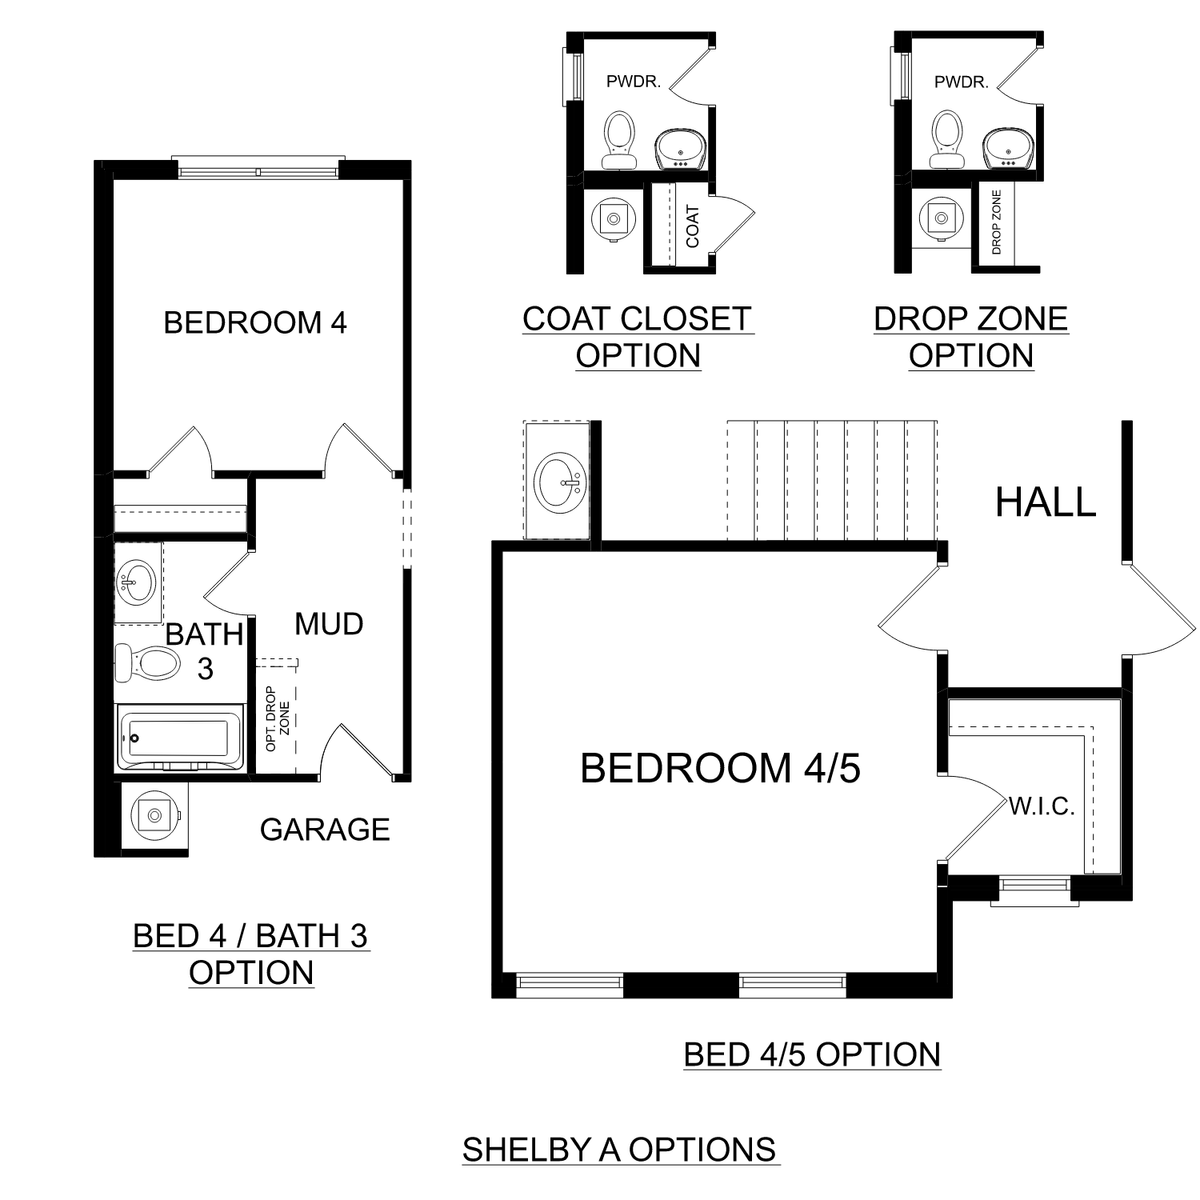 3 - The Shelby A buildable floor plan layout in Davidson Homes' Creekside community.